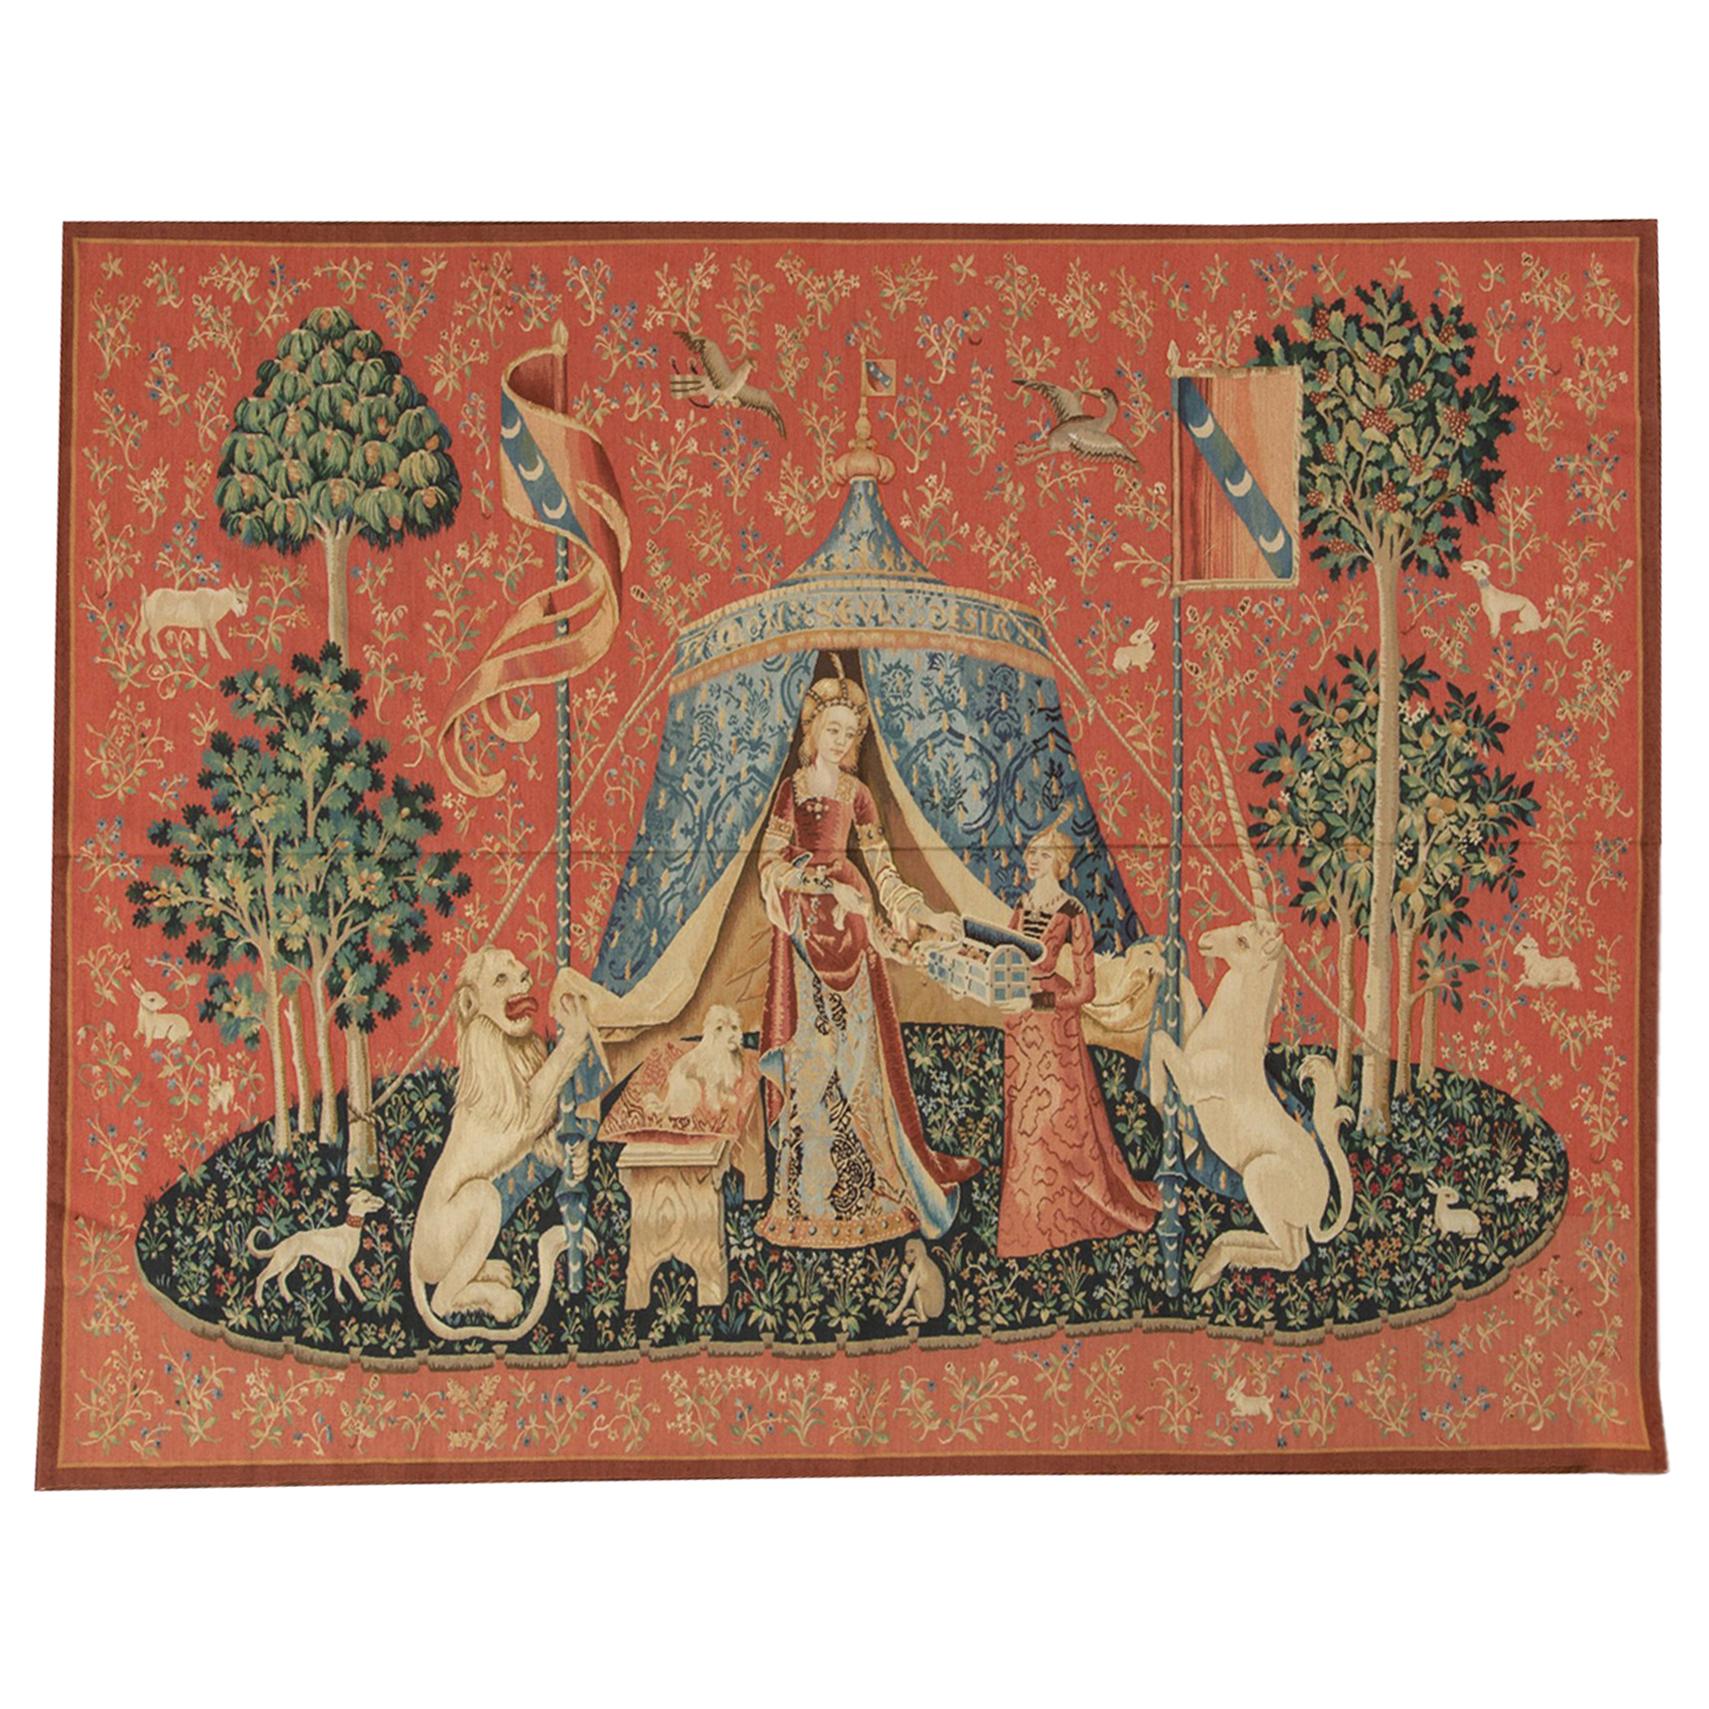 15th Century Tapestry Recreation, "Taste" From the Lady with the Unicorn Series For Sale